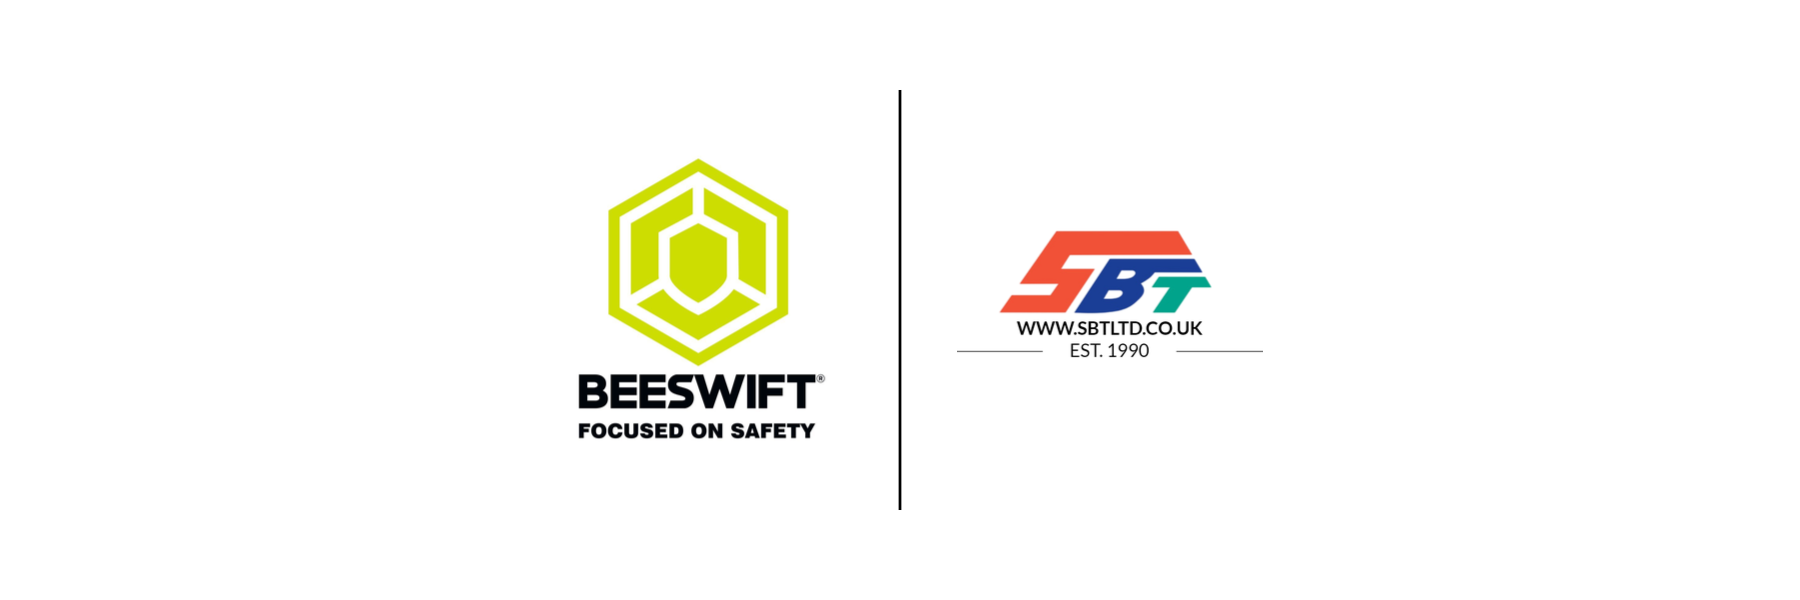 Beeswift Products Now Available - With More To Come...